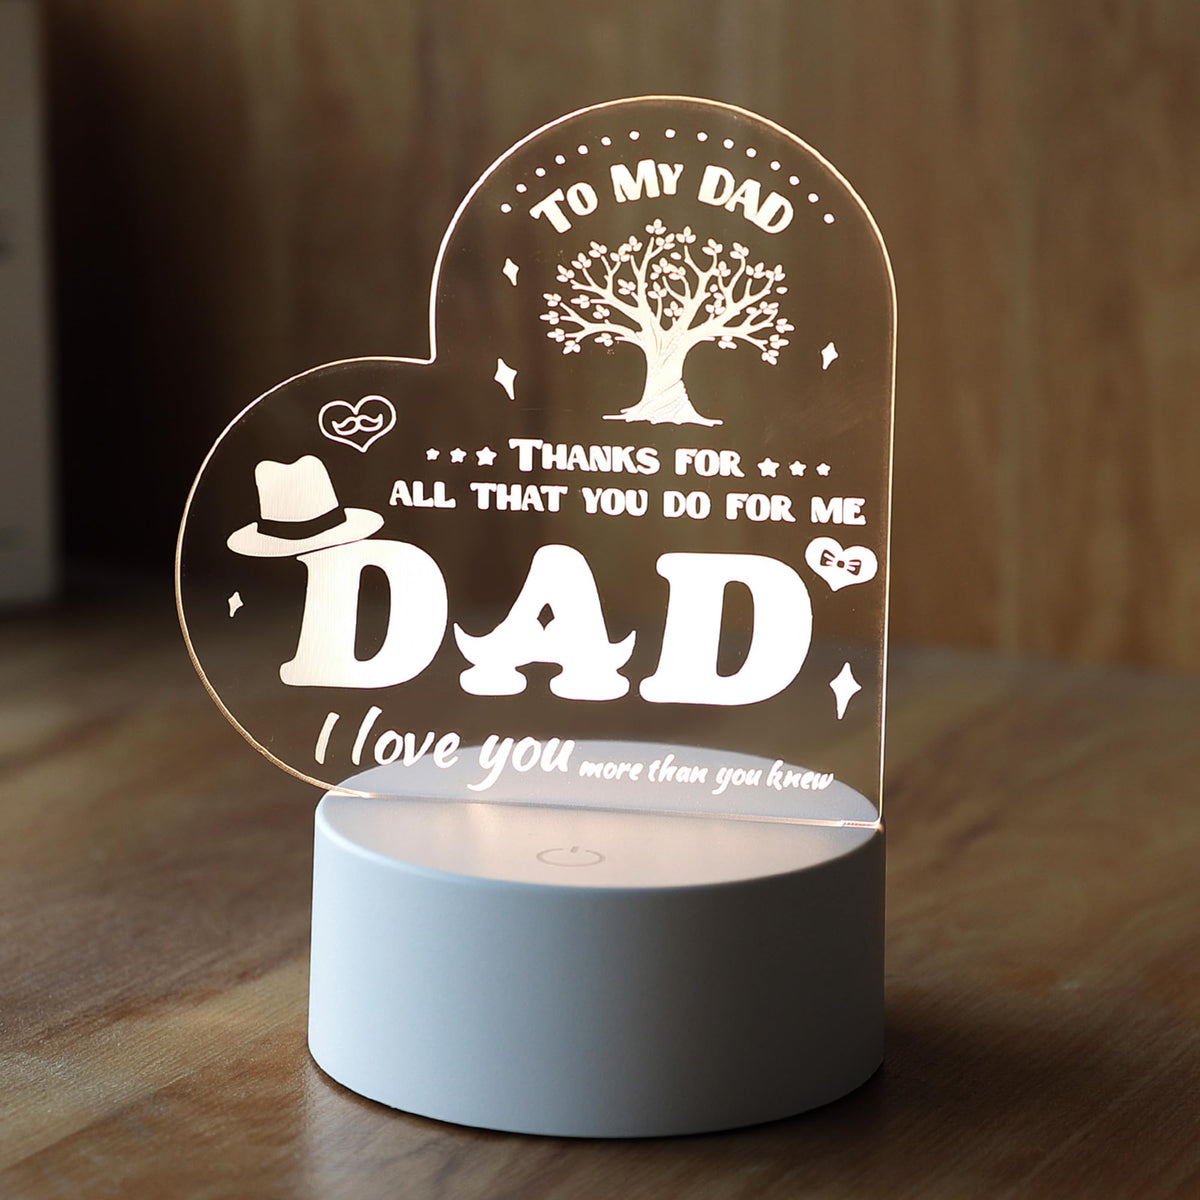 Gleevers Acrylic Plaque with Stand LED Light|Birth Day Christmas Special Occasion|Gift for Dad Grand Father Father's Day|Heart Shaped Engraved Night Light|Best Birthday Gift for Dad|1 Pack.